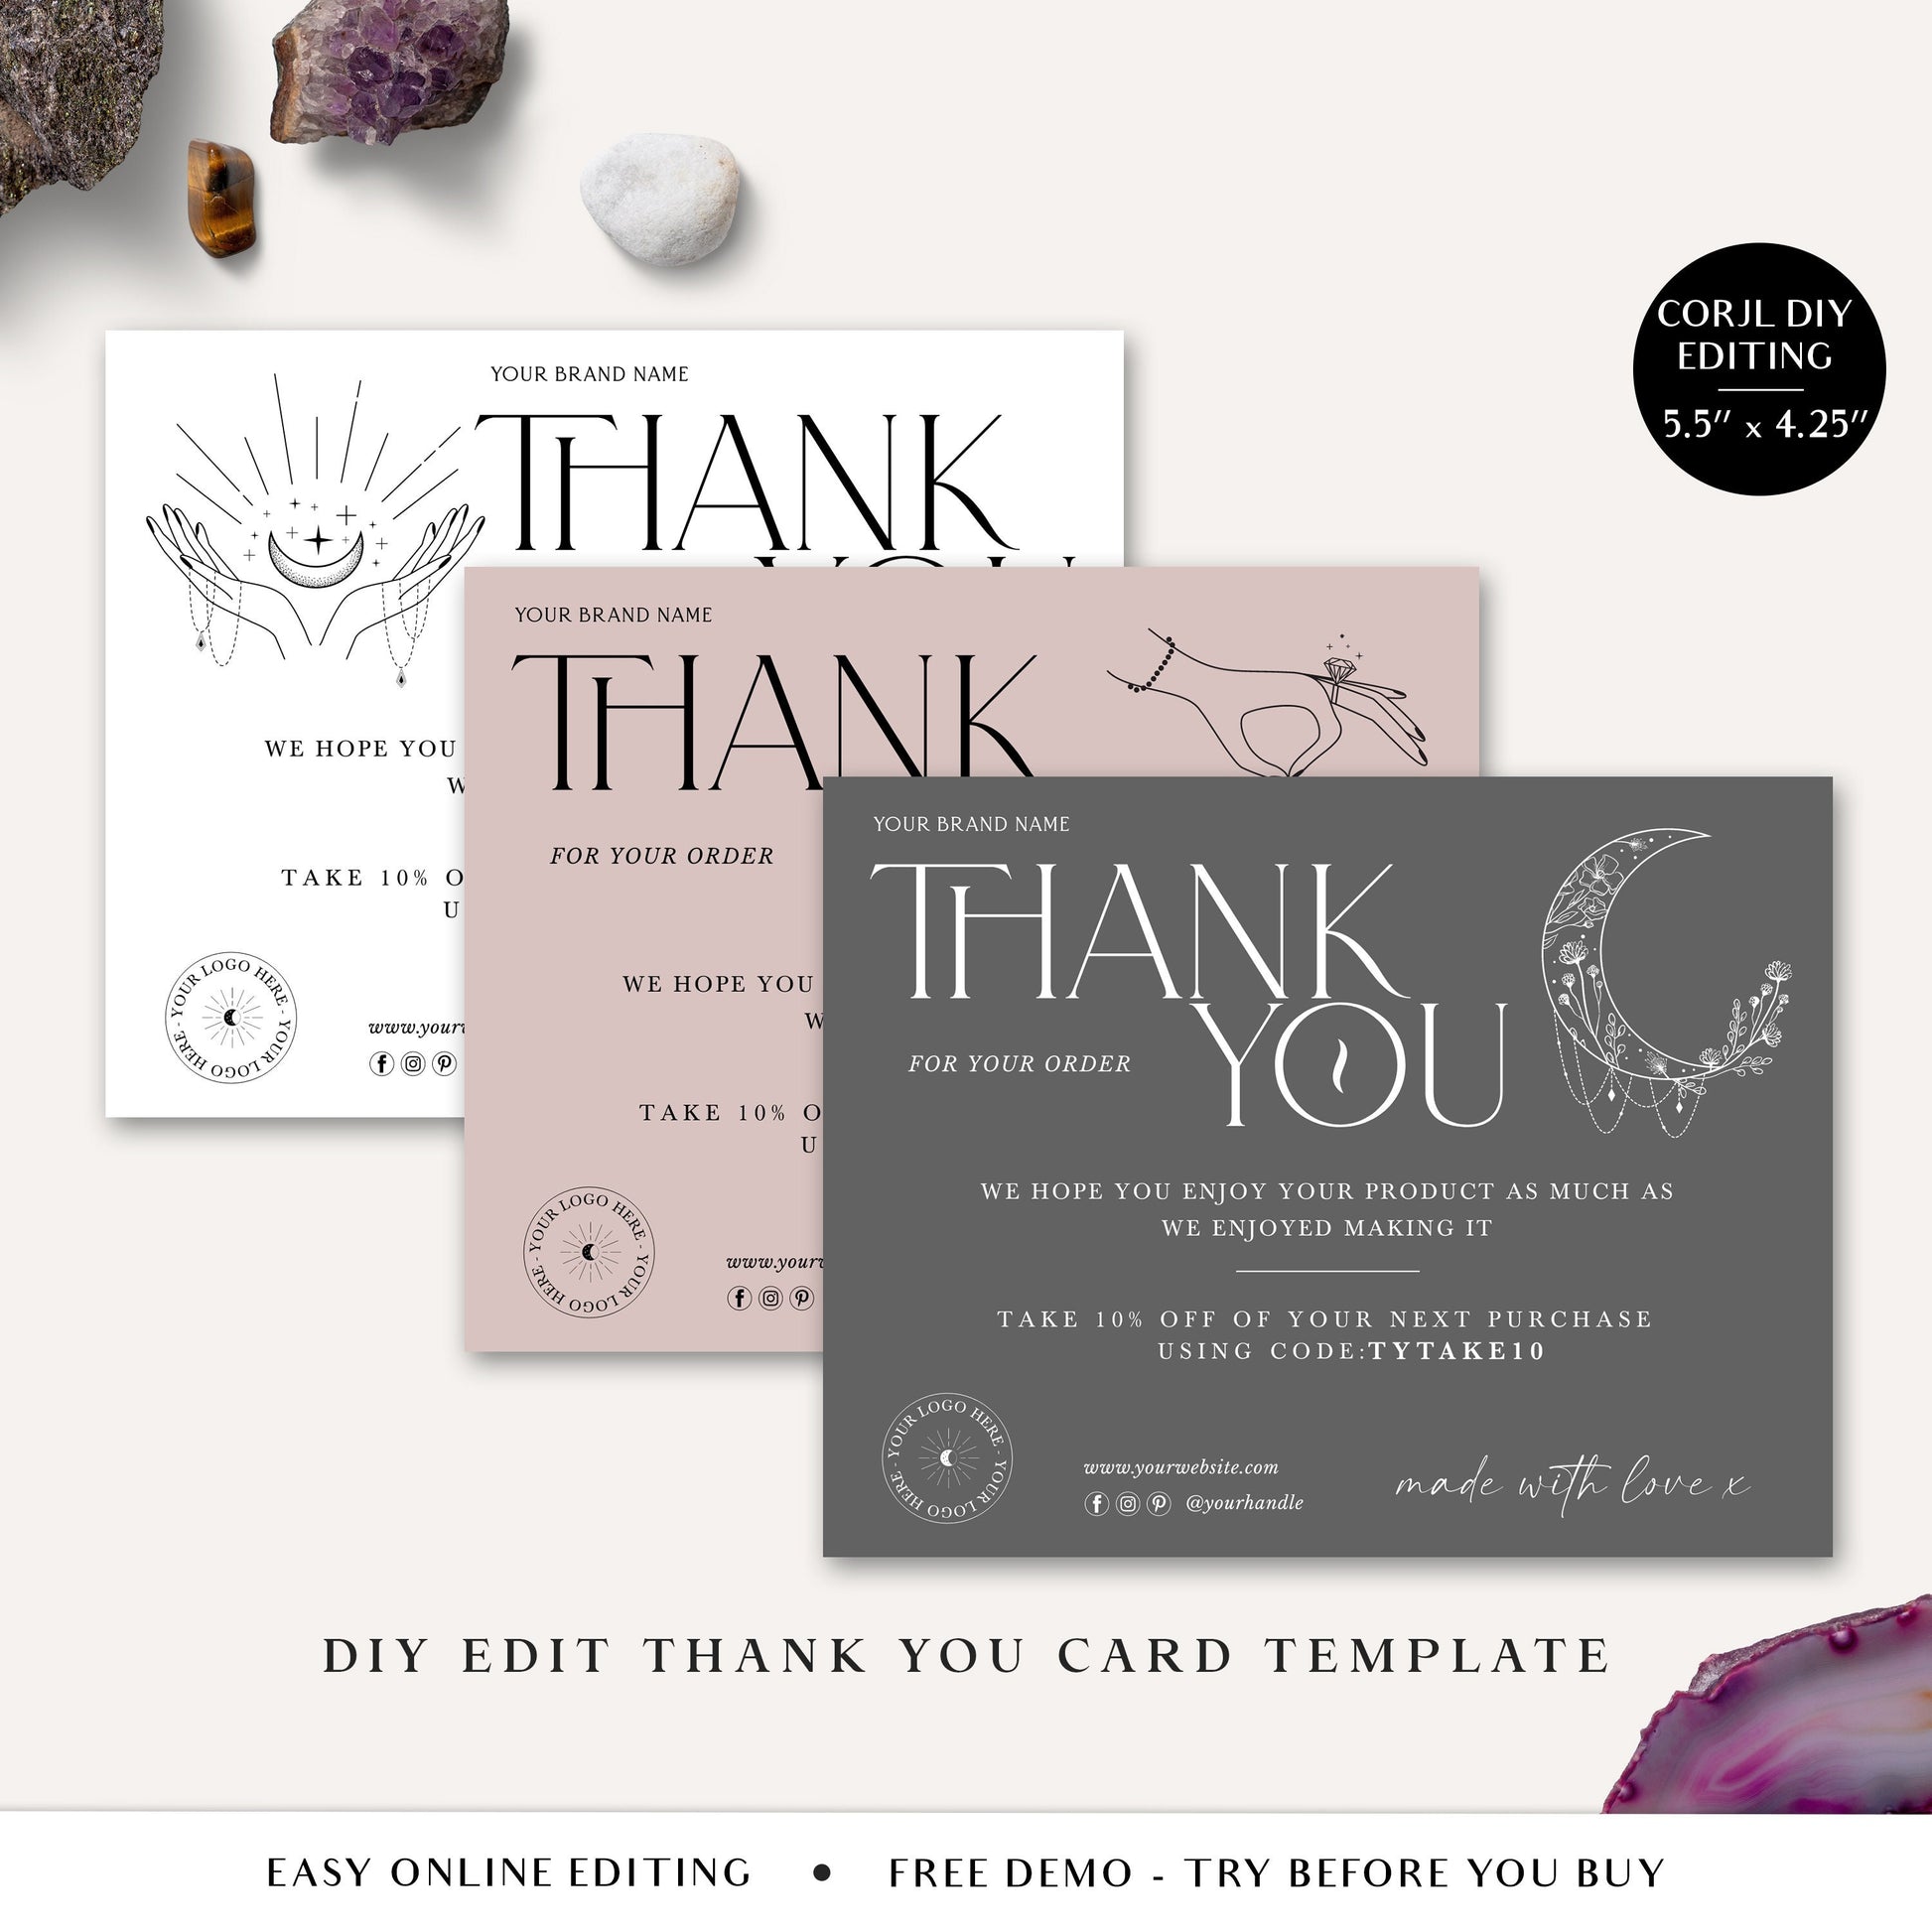 SUPREME IMPRESSION Thank You Cards Small Business 100 Pack (Business Card  Sized) Thank You for Your order Cards with Elegant Design and Meaningful